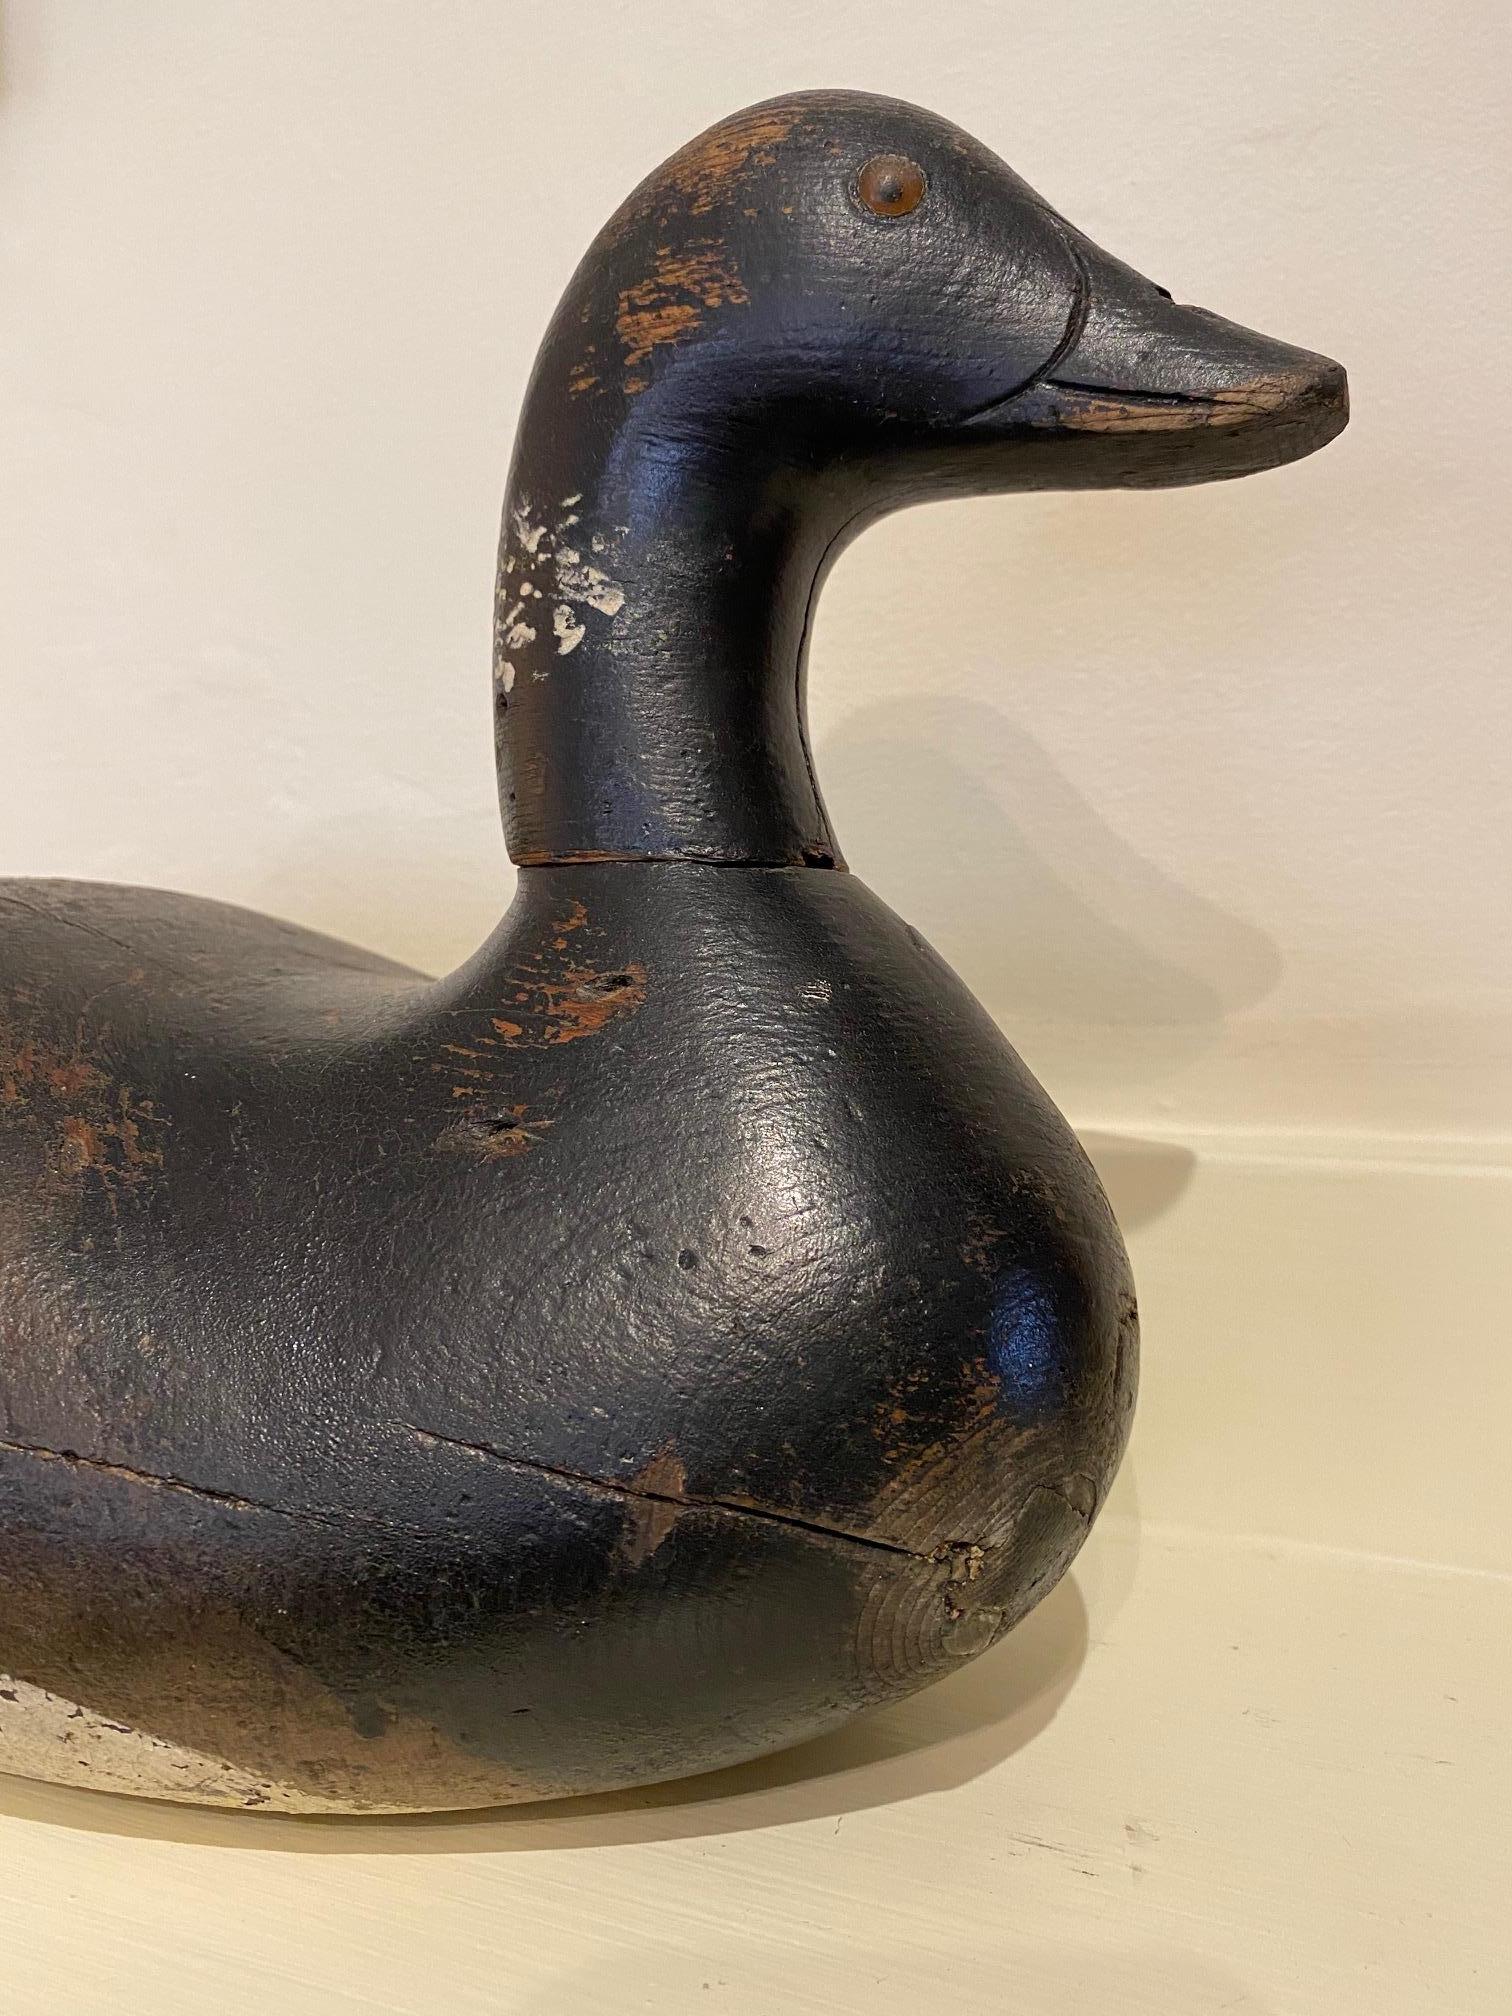 Mason Atlantic Coast Model Brant Decoy, circa 1920, owned by the Muskeget Island Shooting Club (Nantucket). The decoy has head akin to the Challenge Grade models with glass eyes, carved nares and mandible, fastened to large body via peg inserted